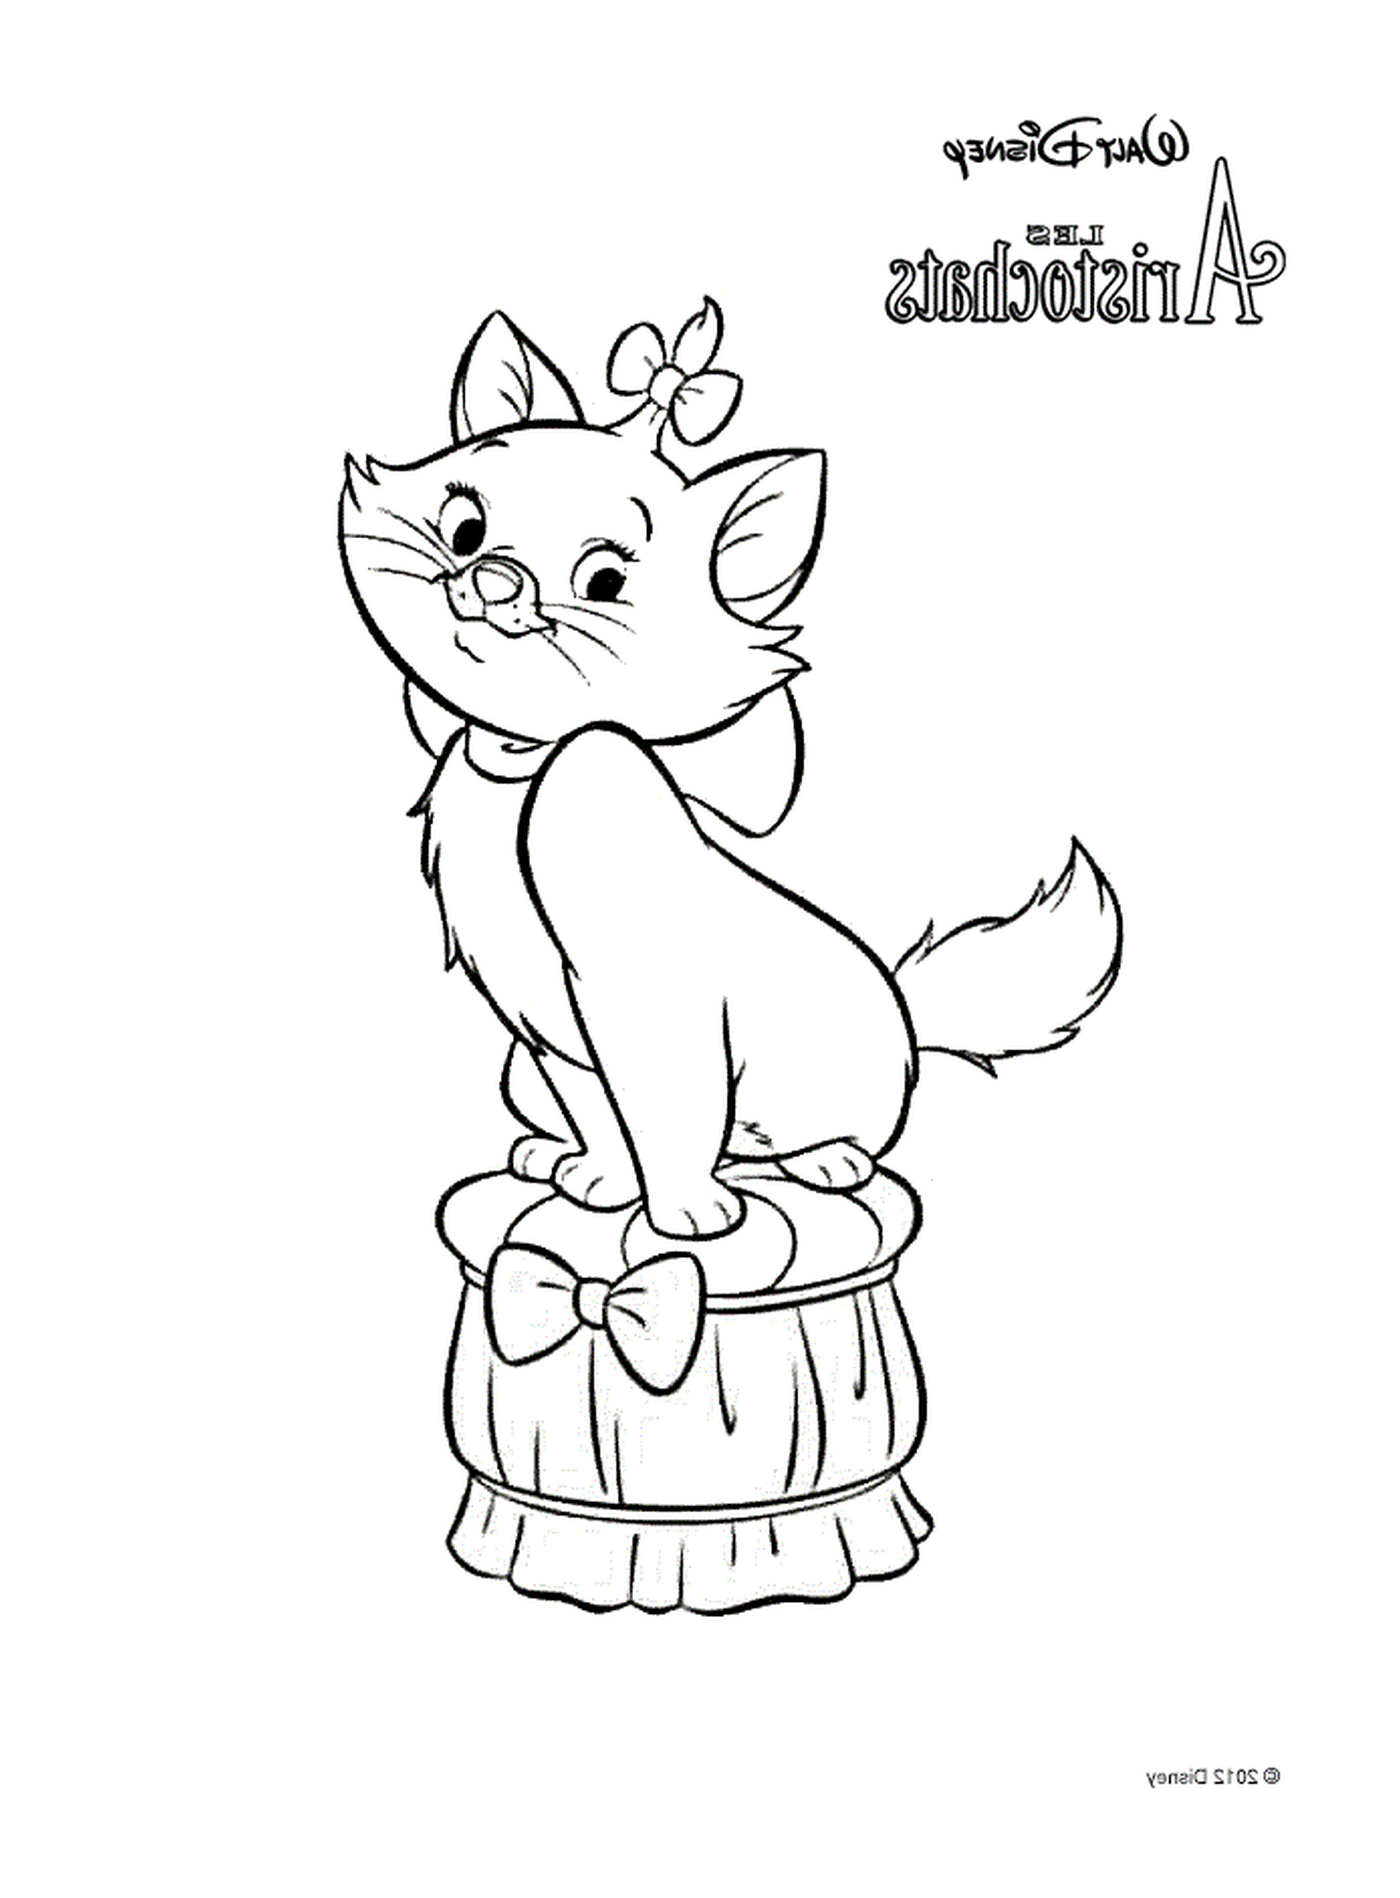  Marie, the cat of Disney's Aristochats, sitting on a barrel 